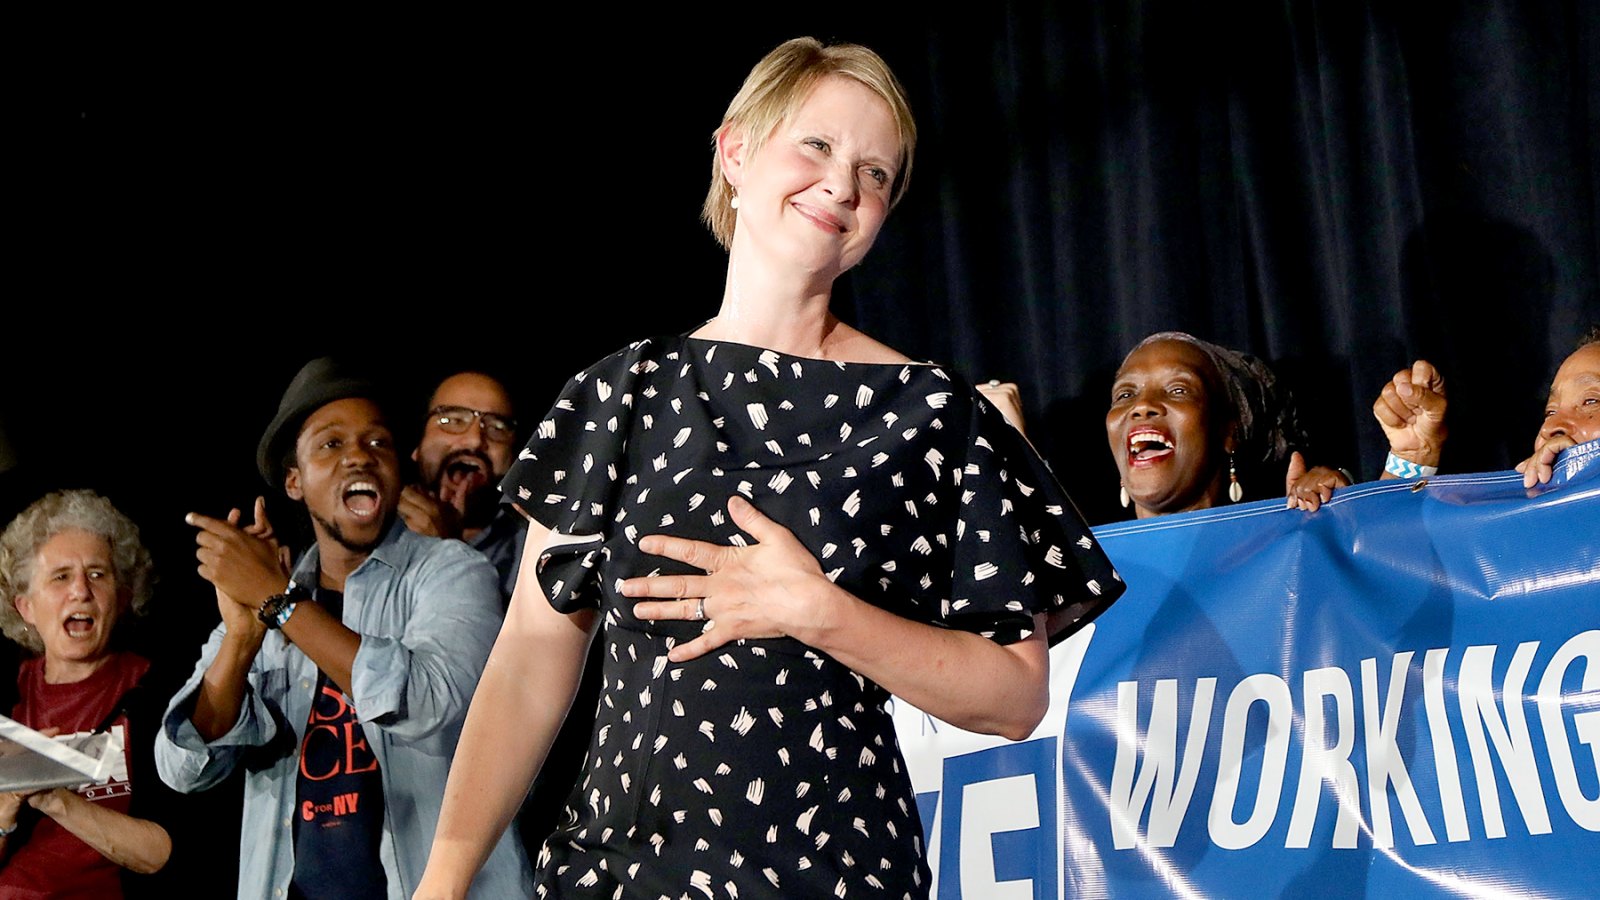 Cynthia-Nixon-Thanks-Supporters-After-Losing-Bid-for-New-York-Governor